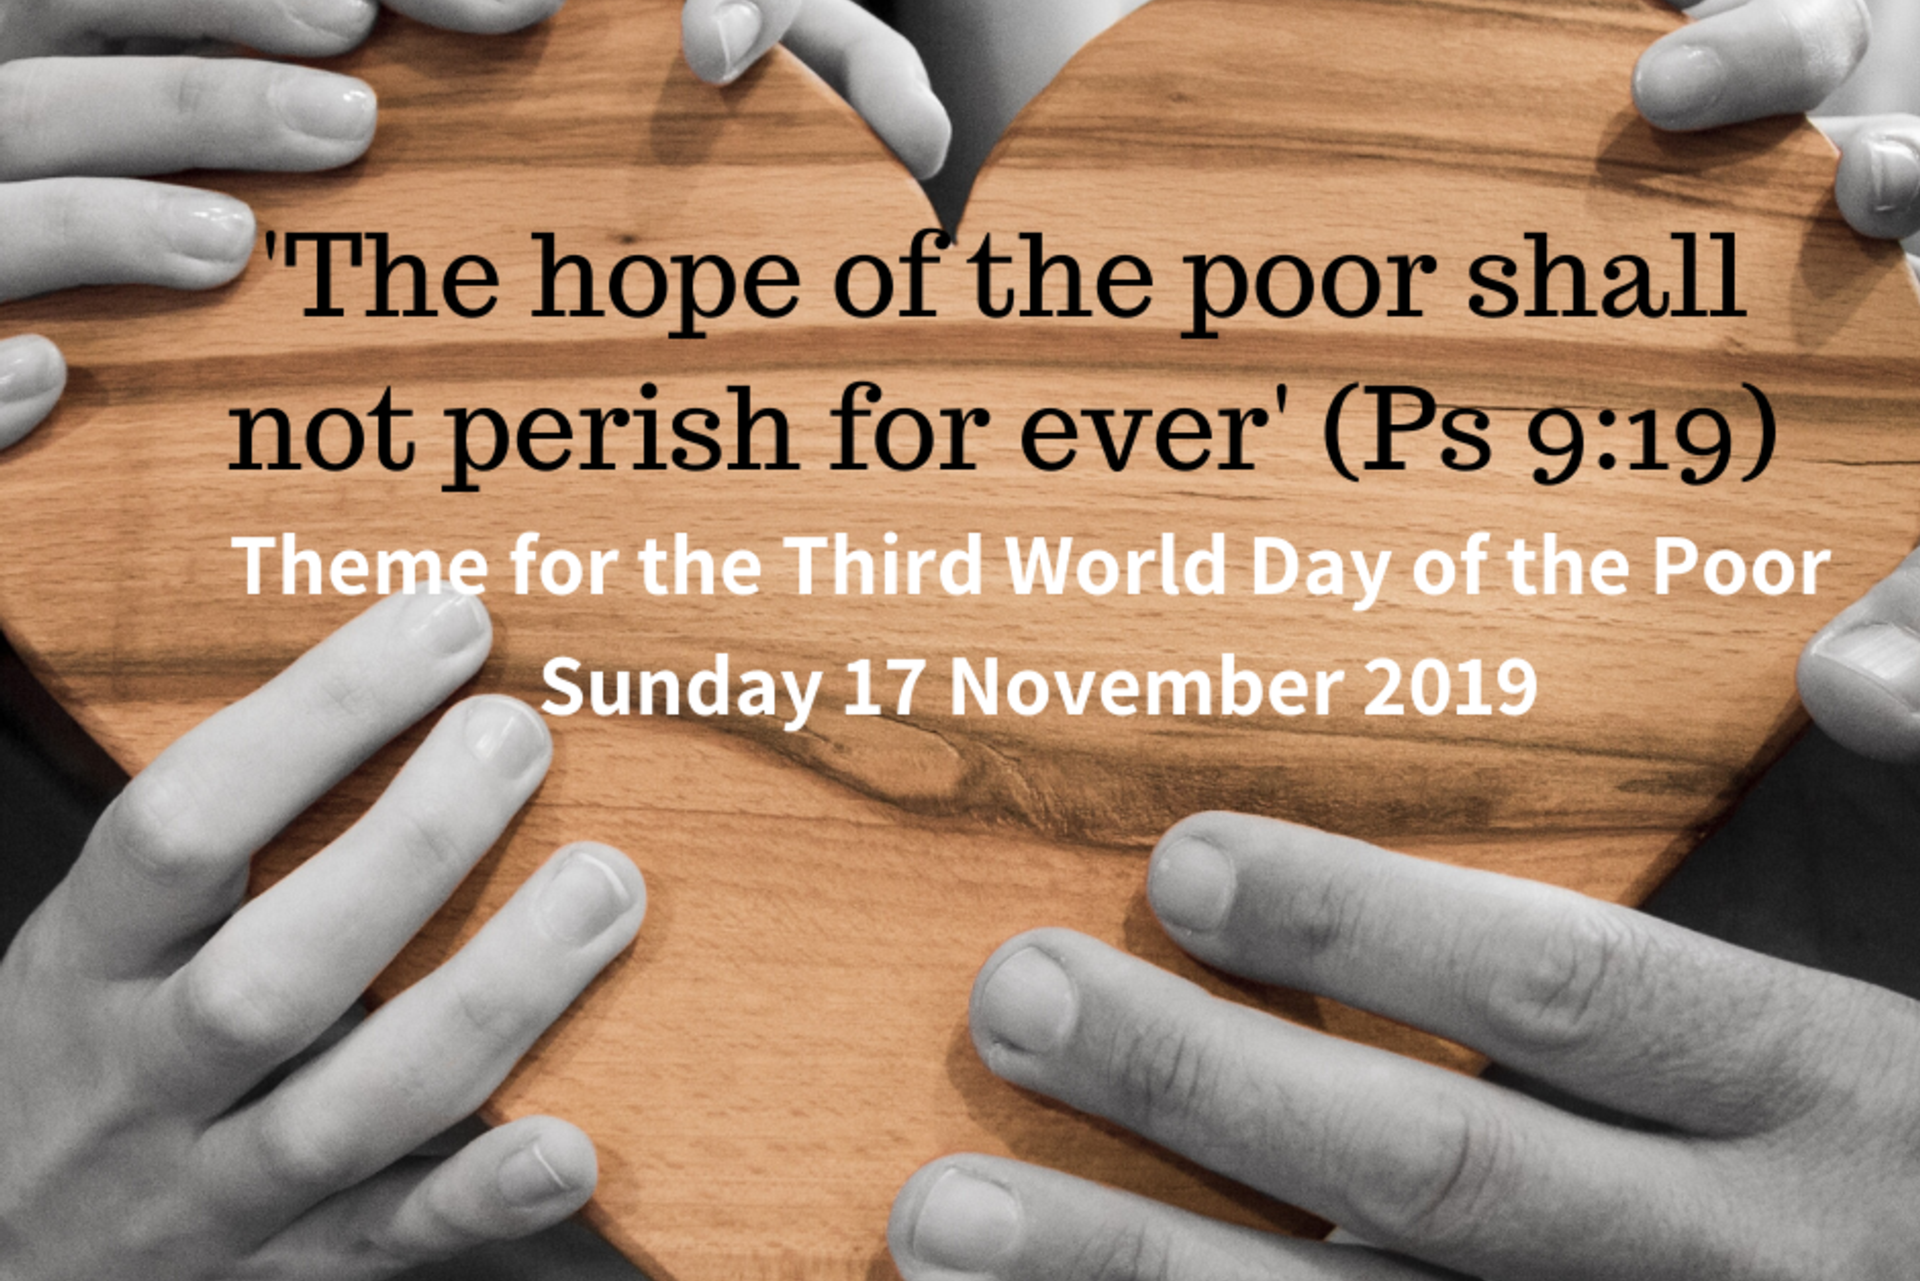 World Day of the Poor – 17 November 2019